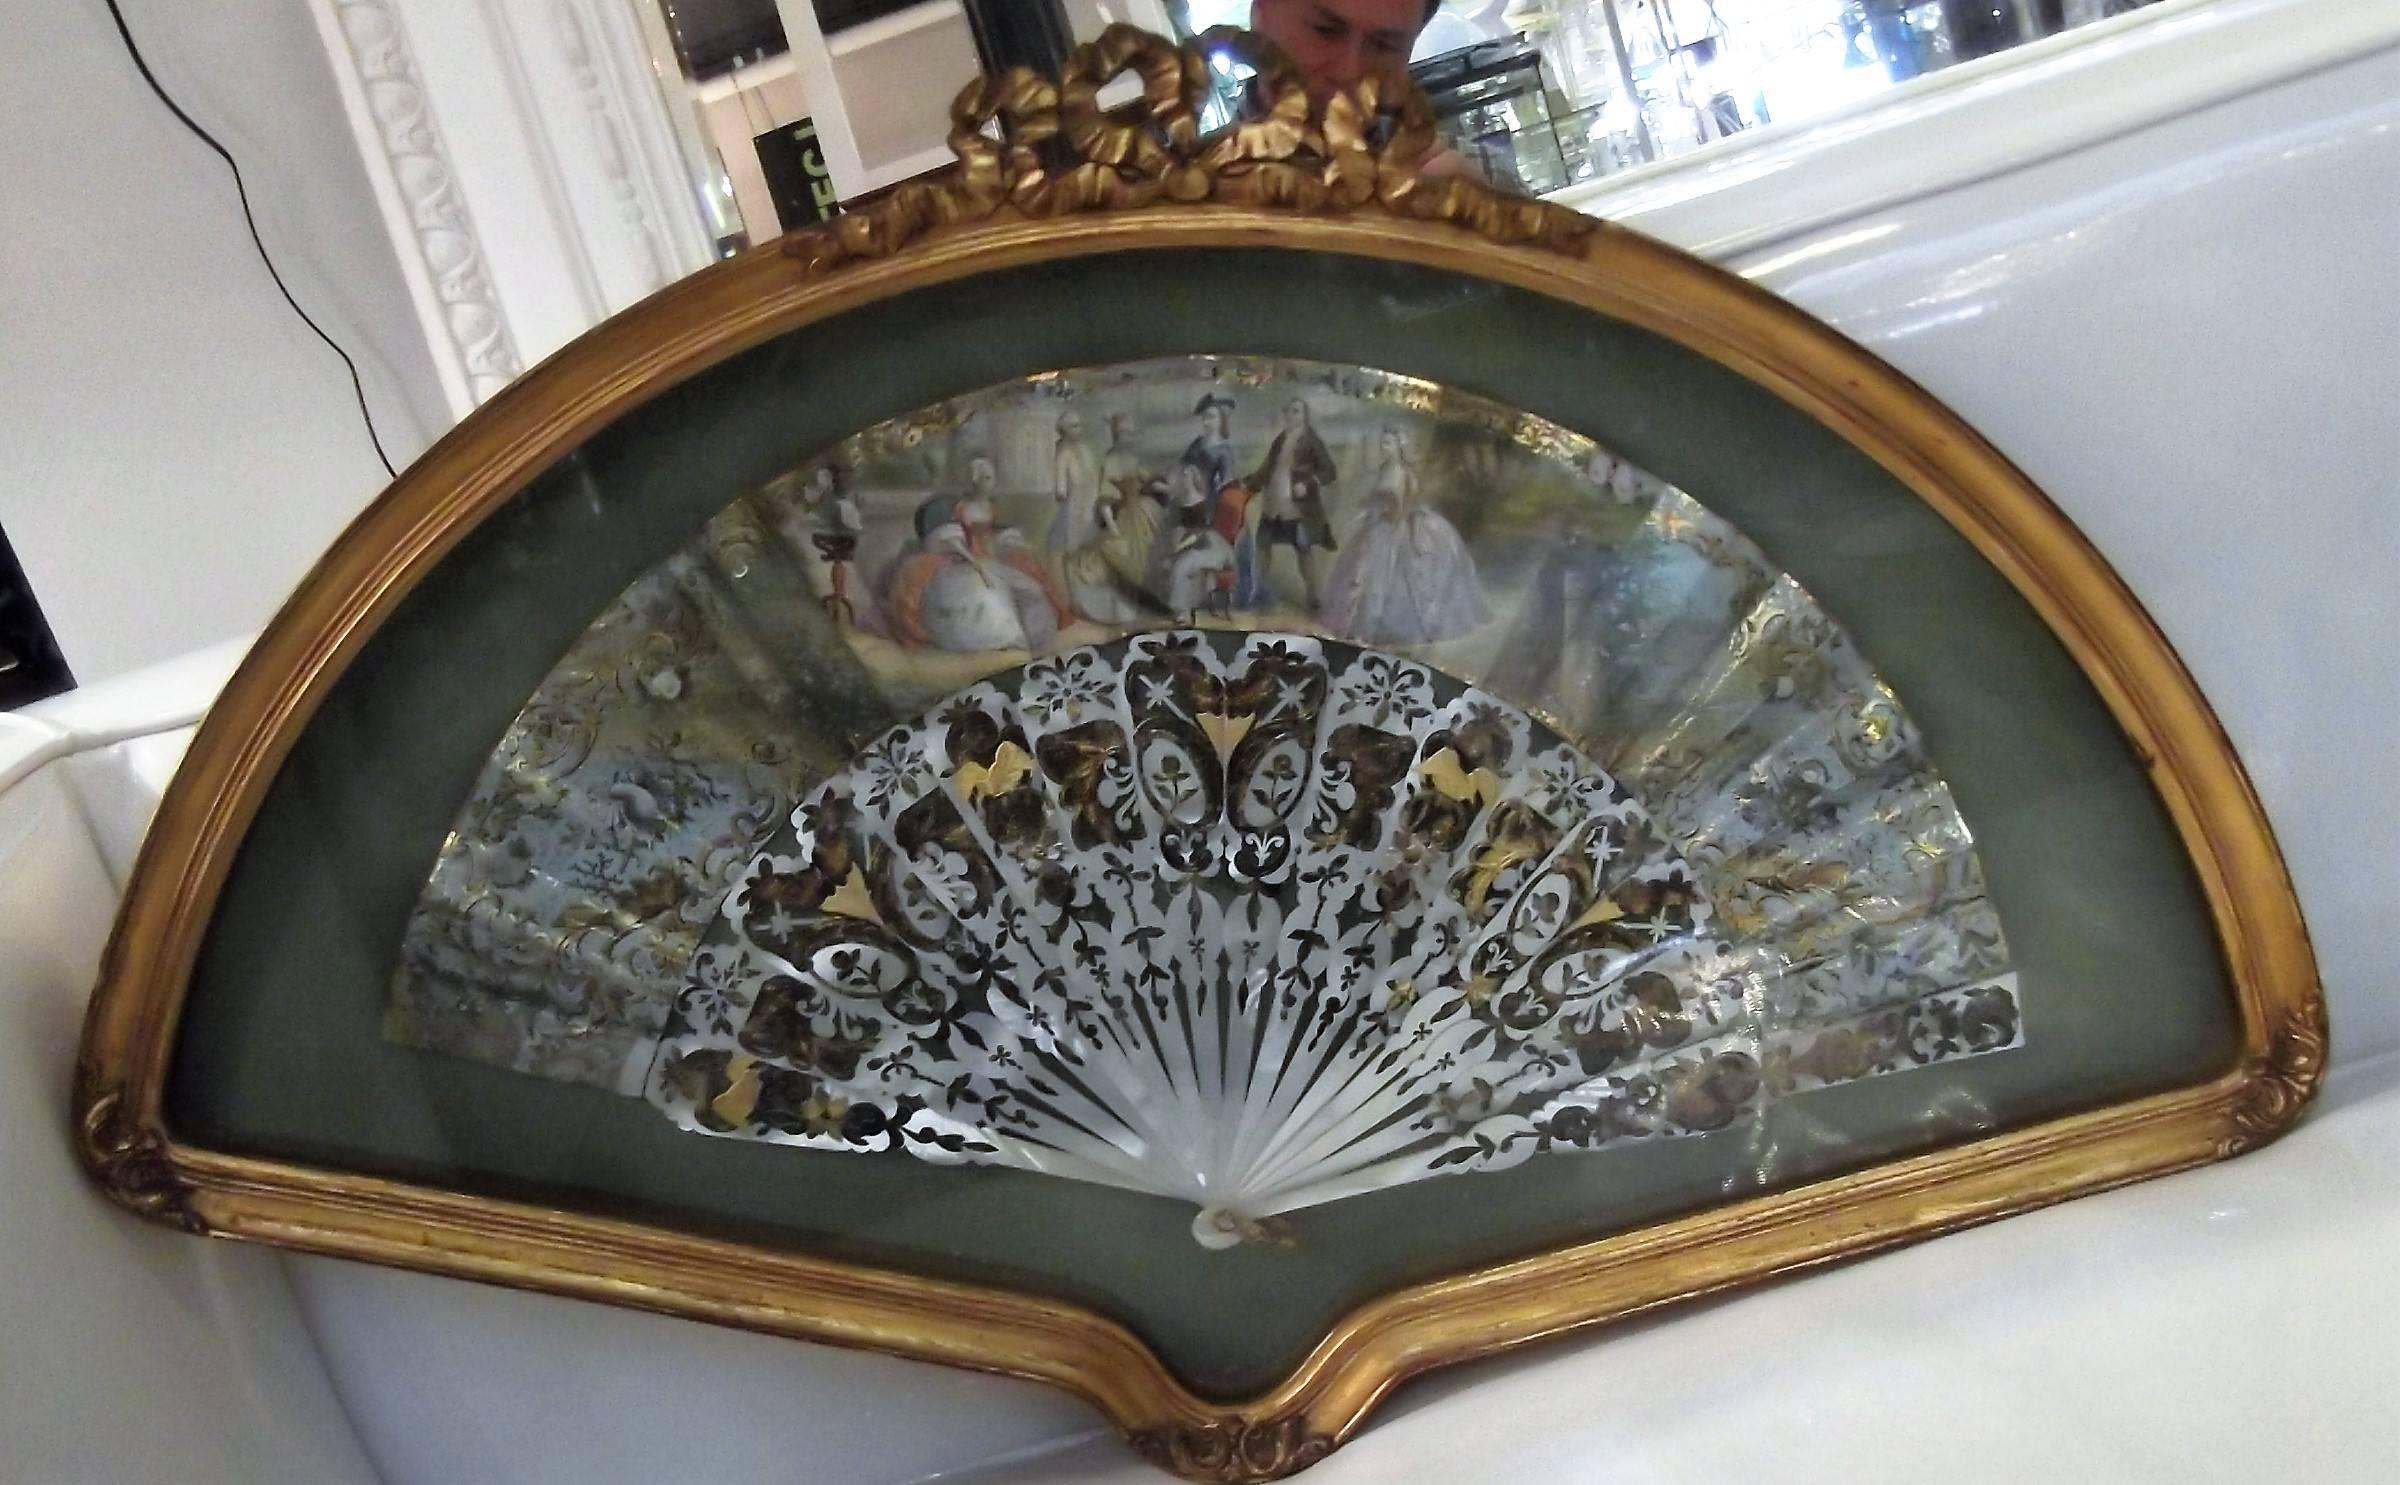 Antique mid-19th century hand-painted French fan with pierced mother of pearl   spokes. Beautifully presented in a custom gilt wood frame.  